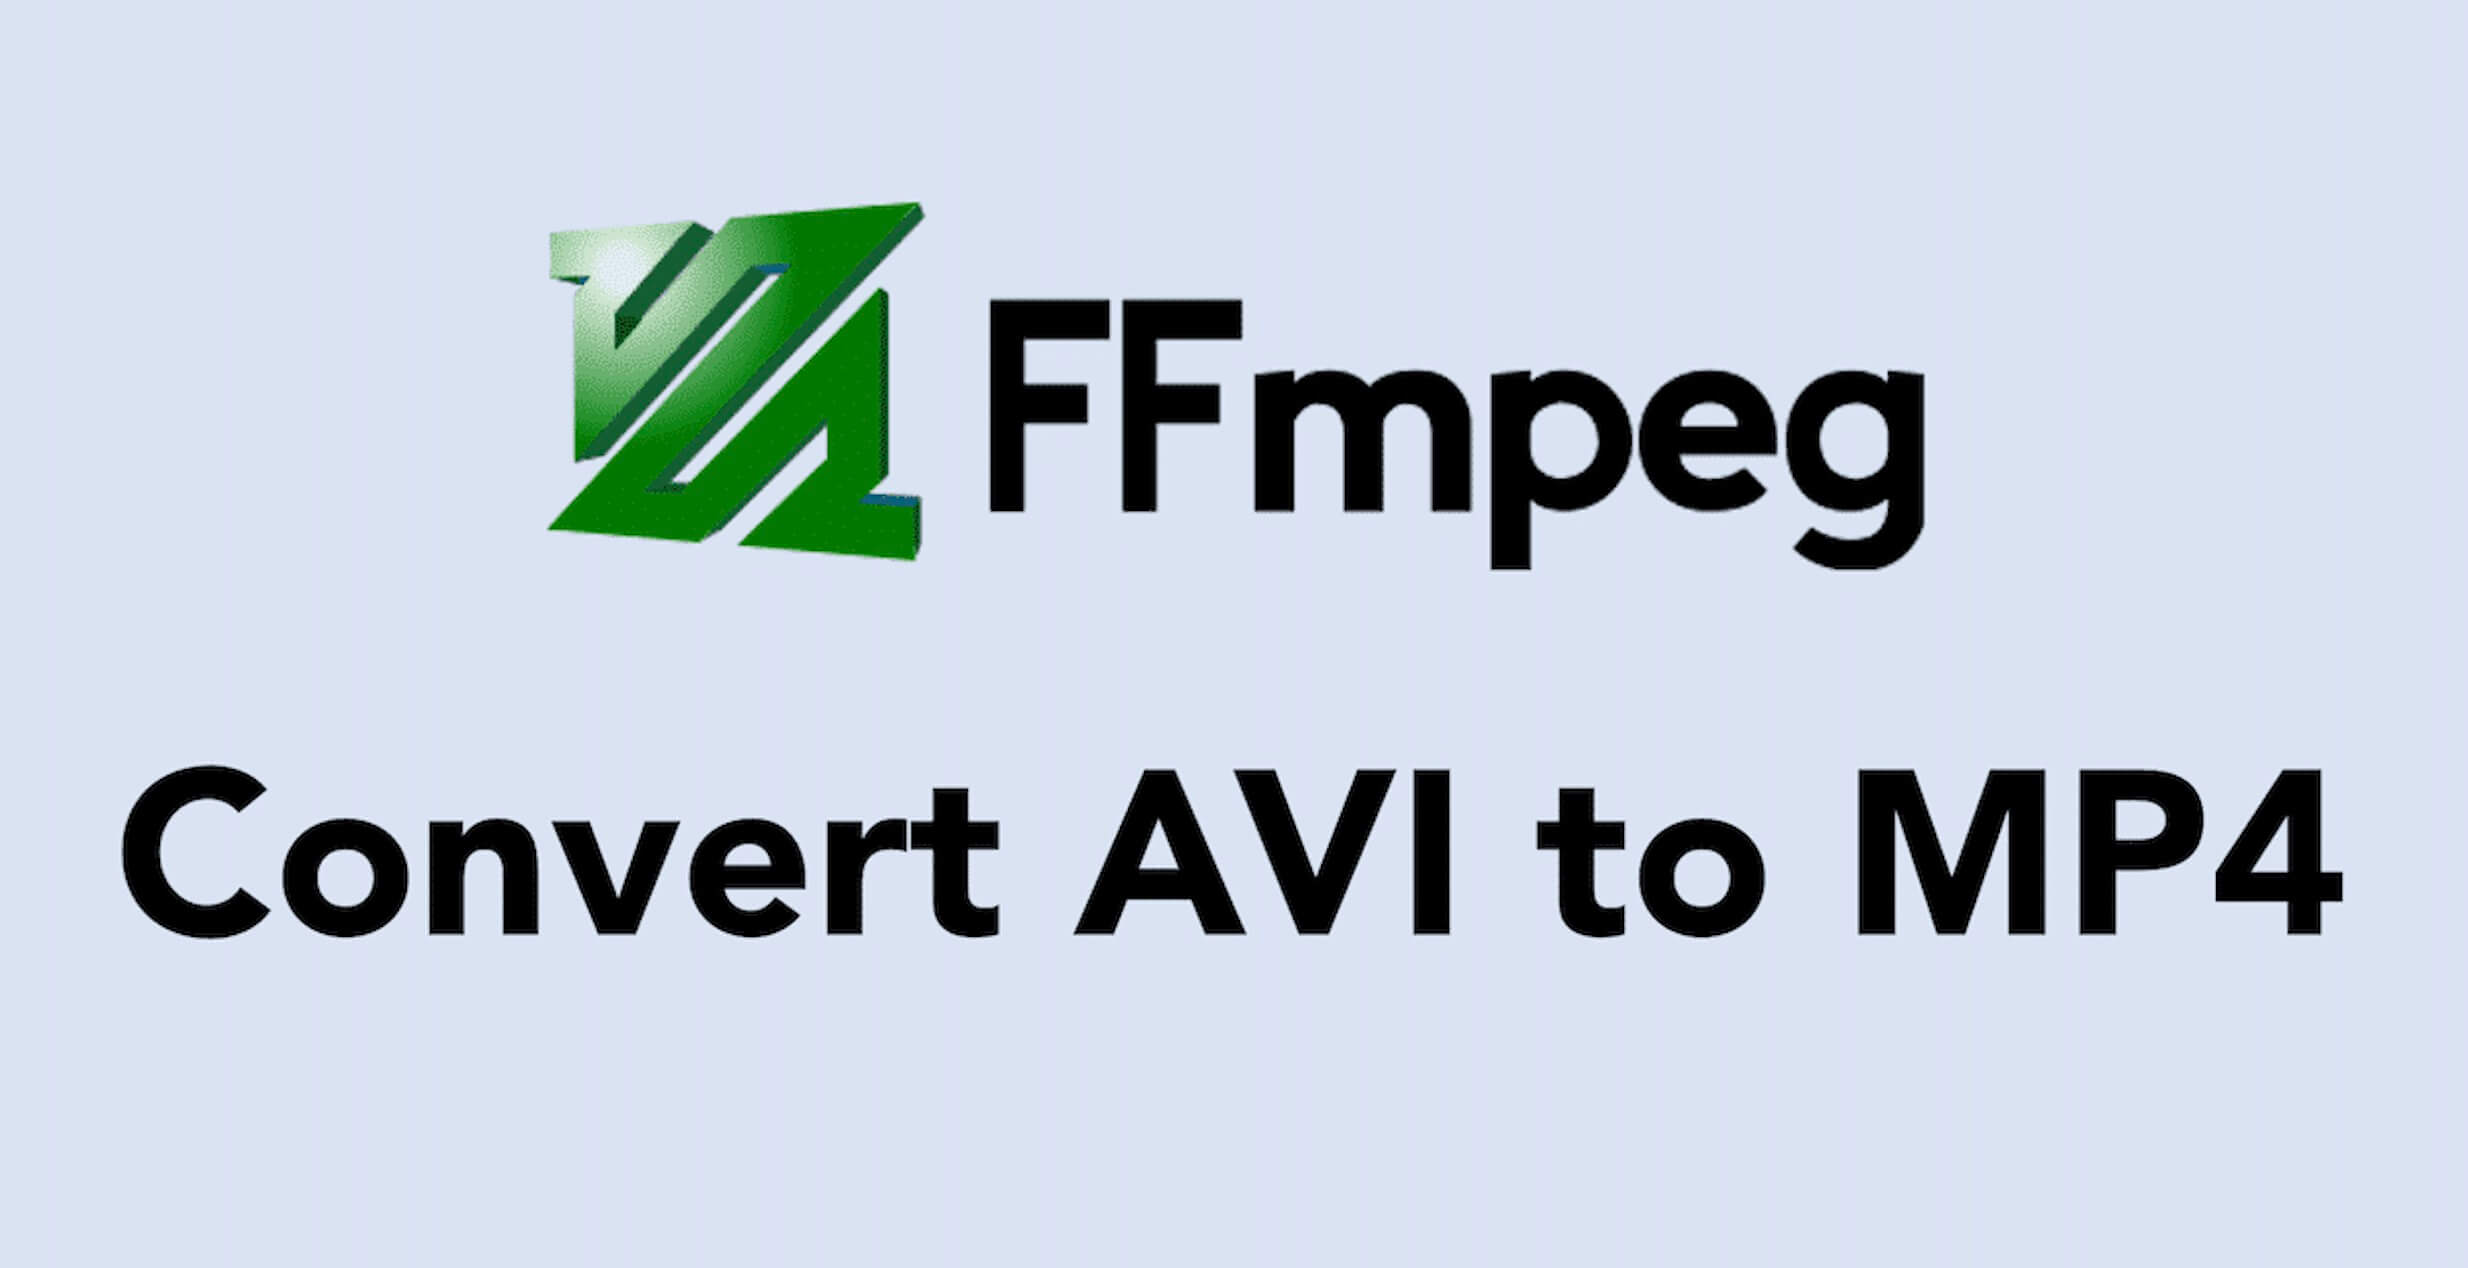  Can-quicktime-play-avi-convert-avi-with-ffmpeg 